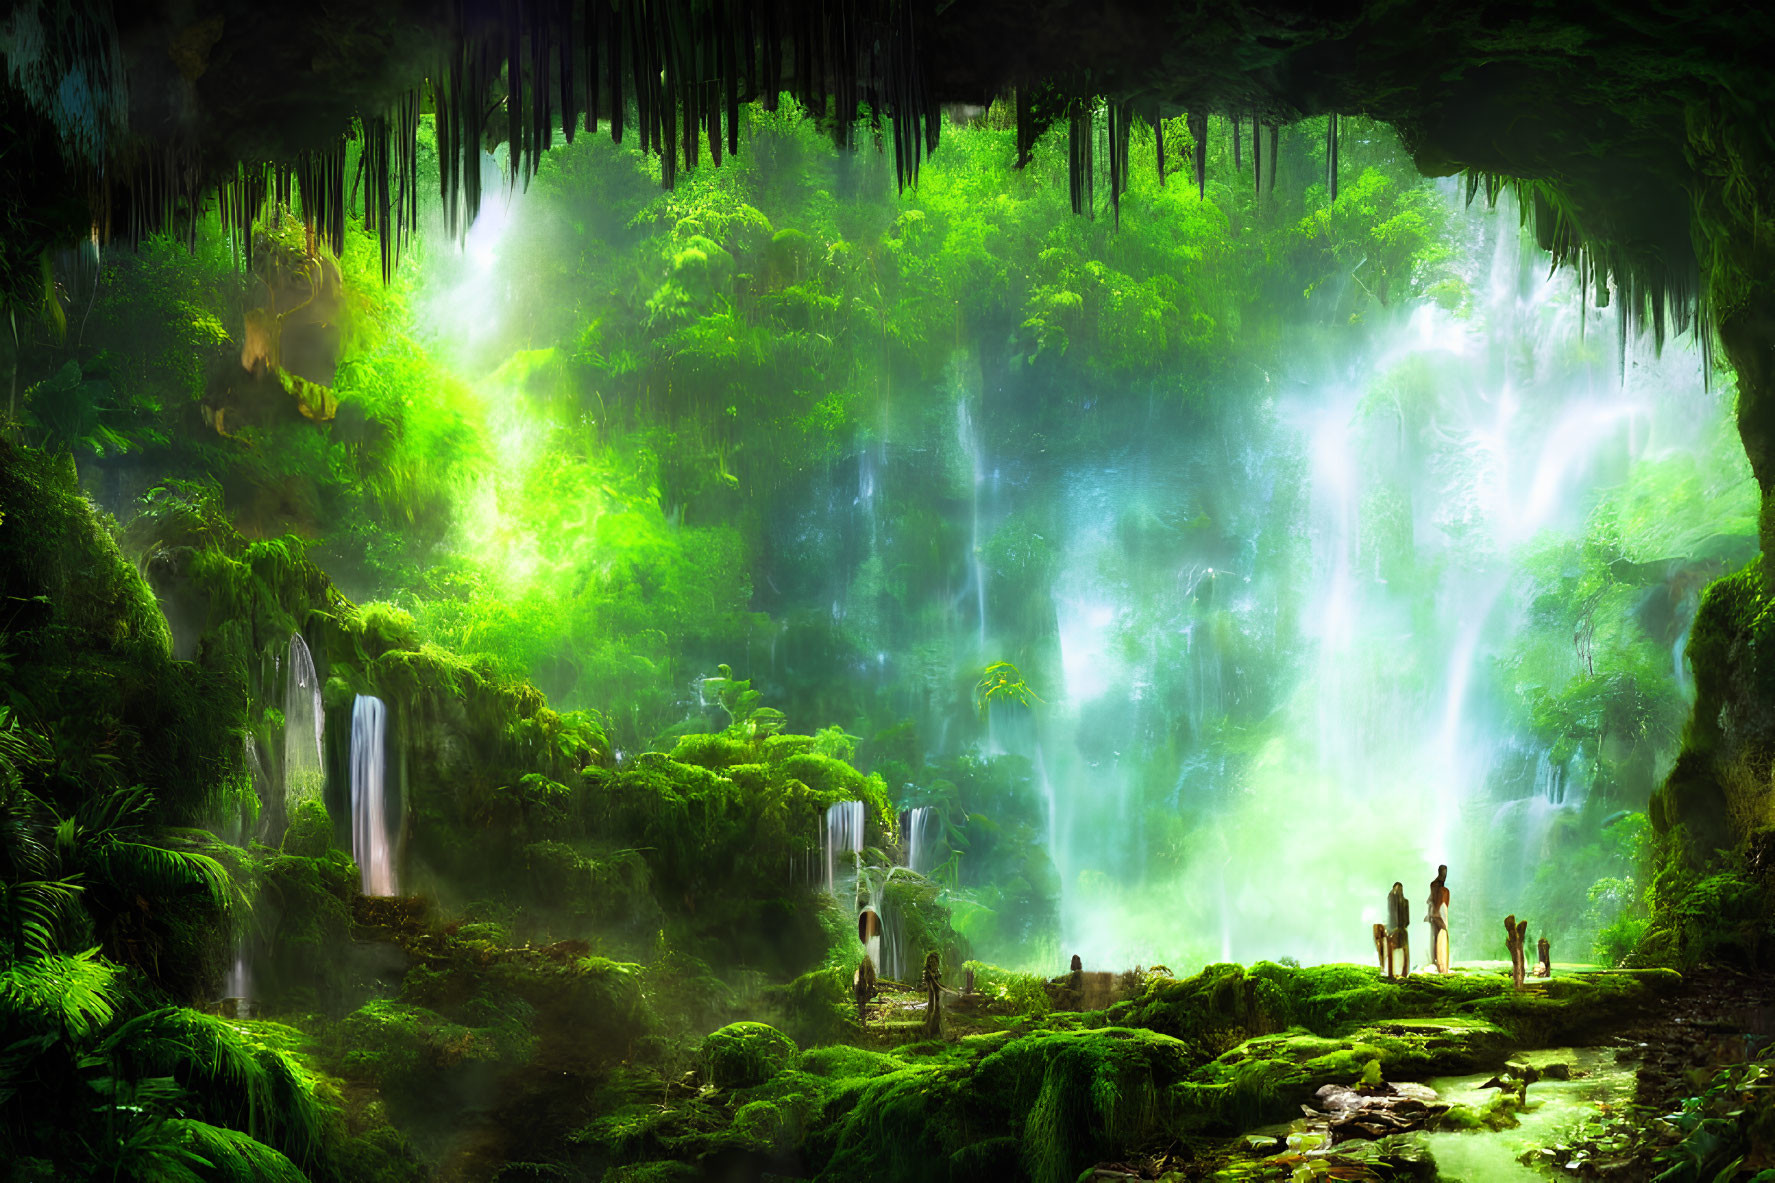 Explorers in lush cave with waterfalls and mist